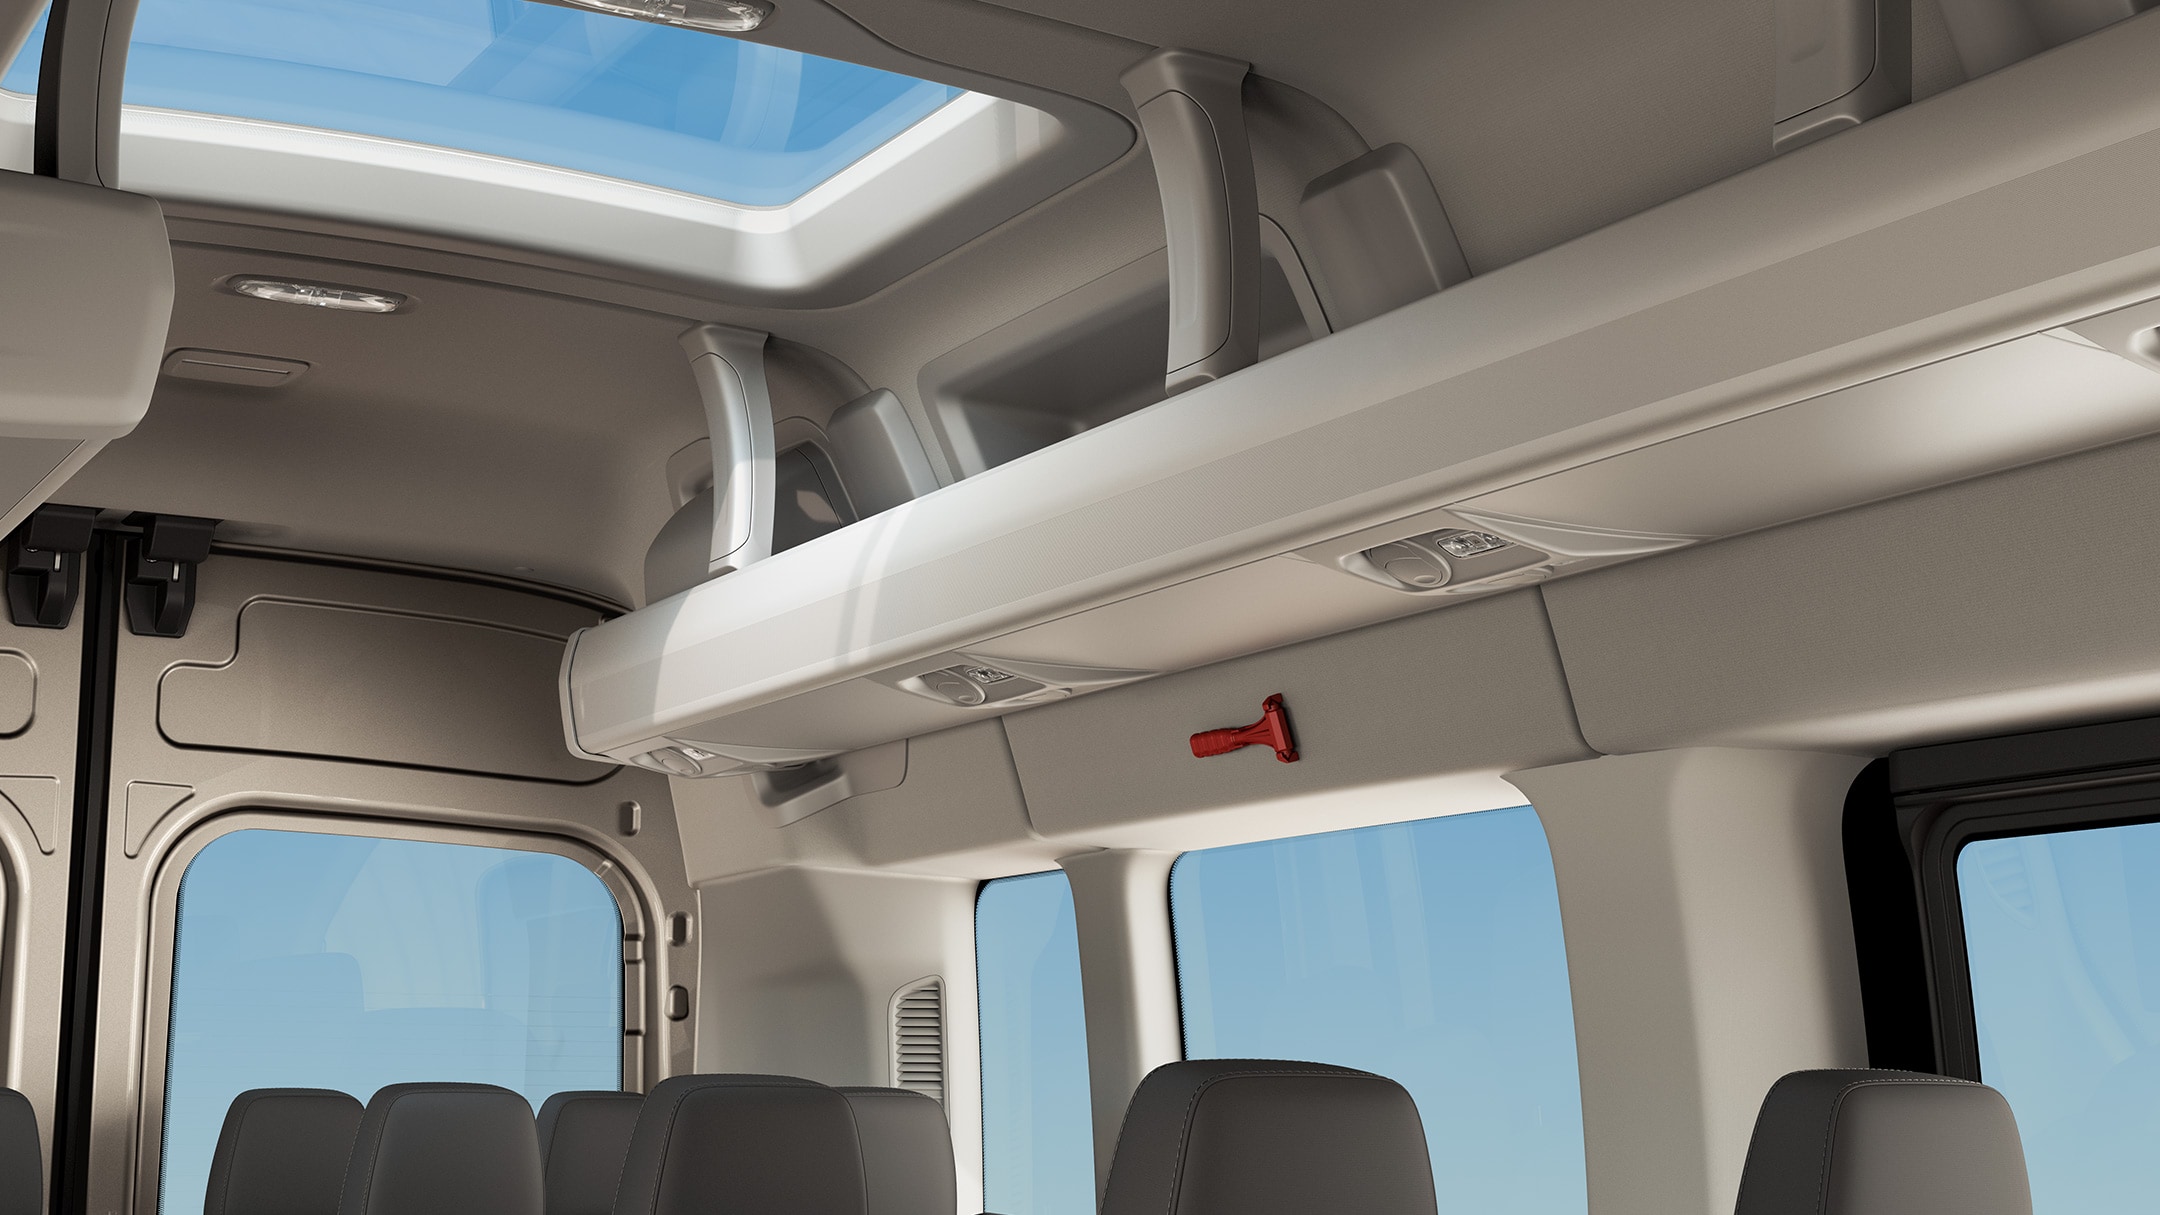 All New Ford Transit Minibus rear interior roof close up